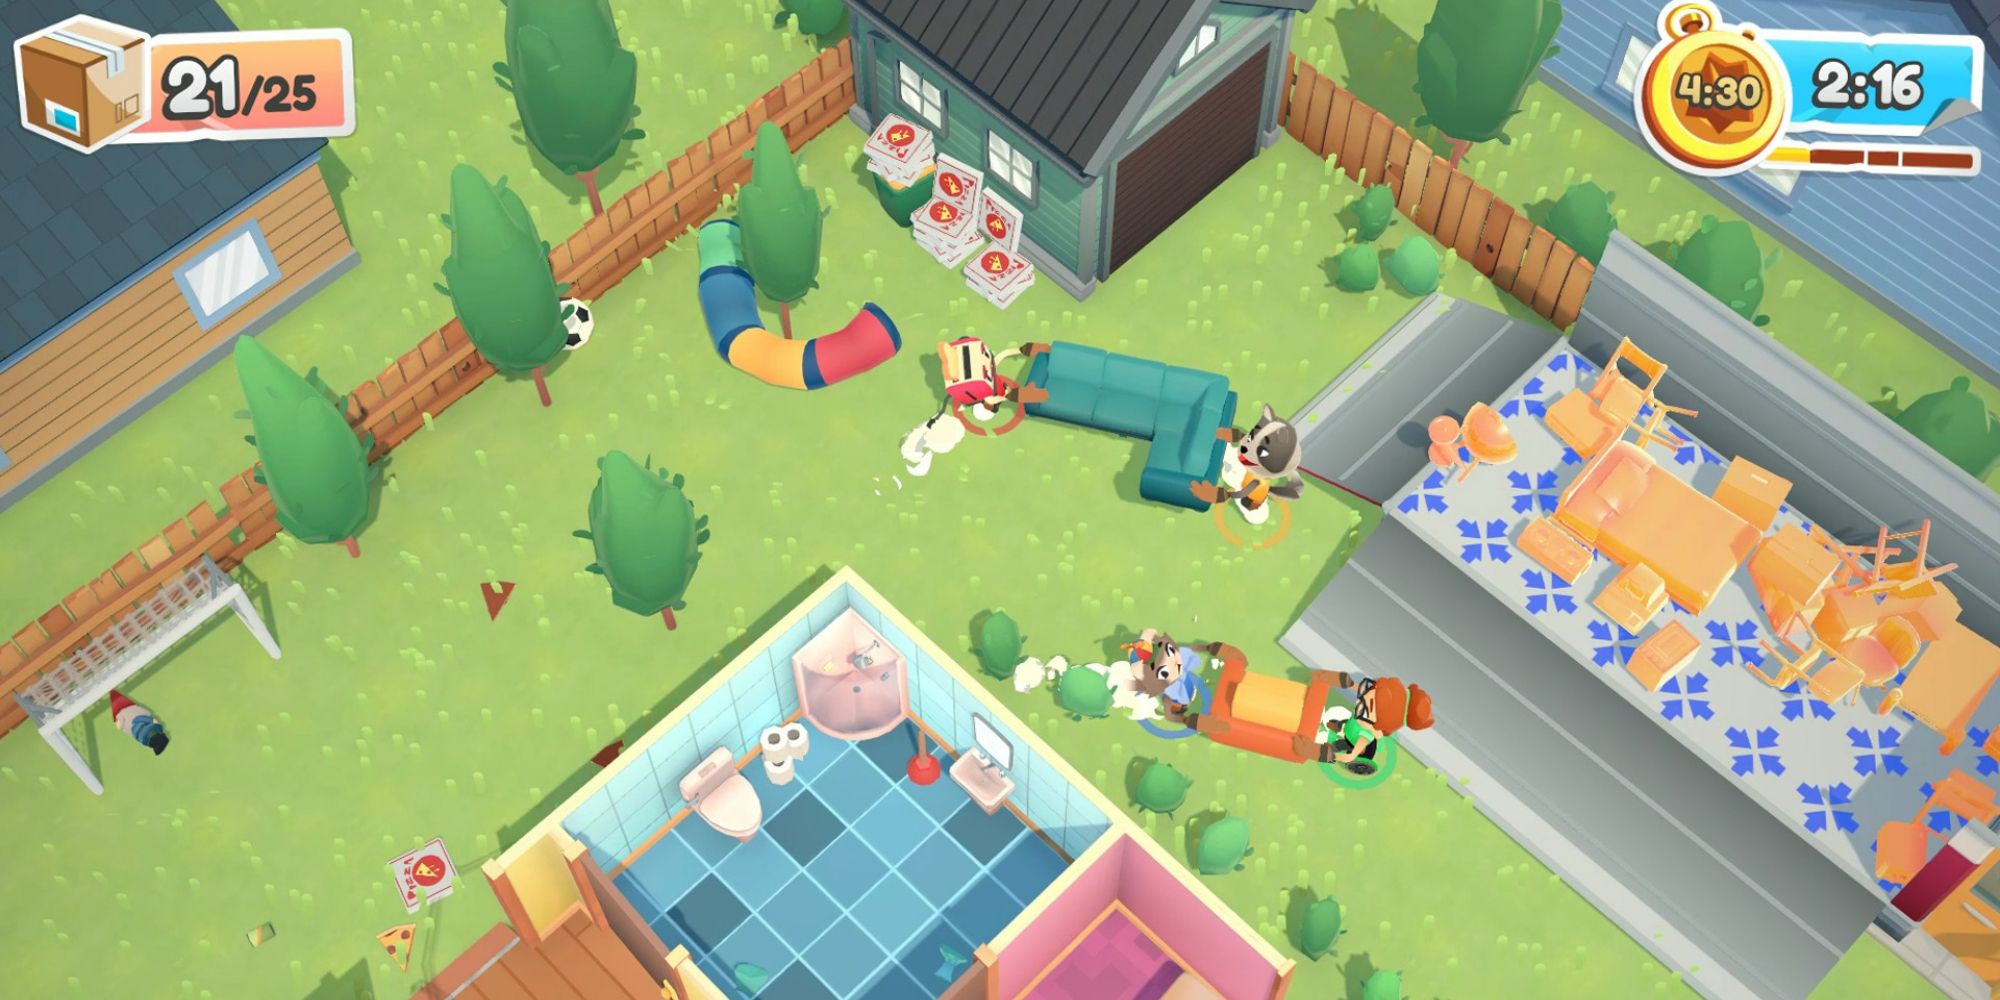 Gameplay from Moving Out showing players attempting to move furniture past obstacles.